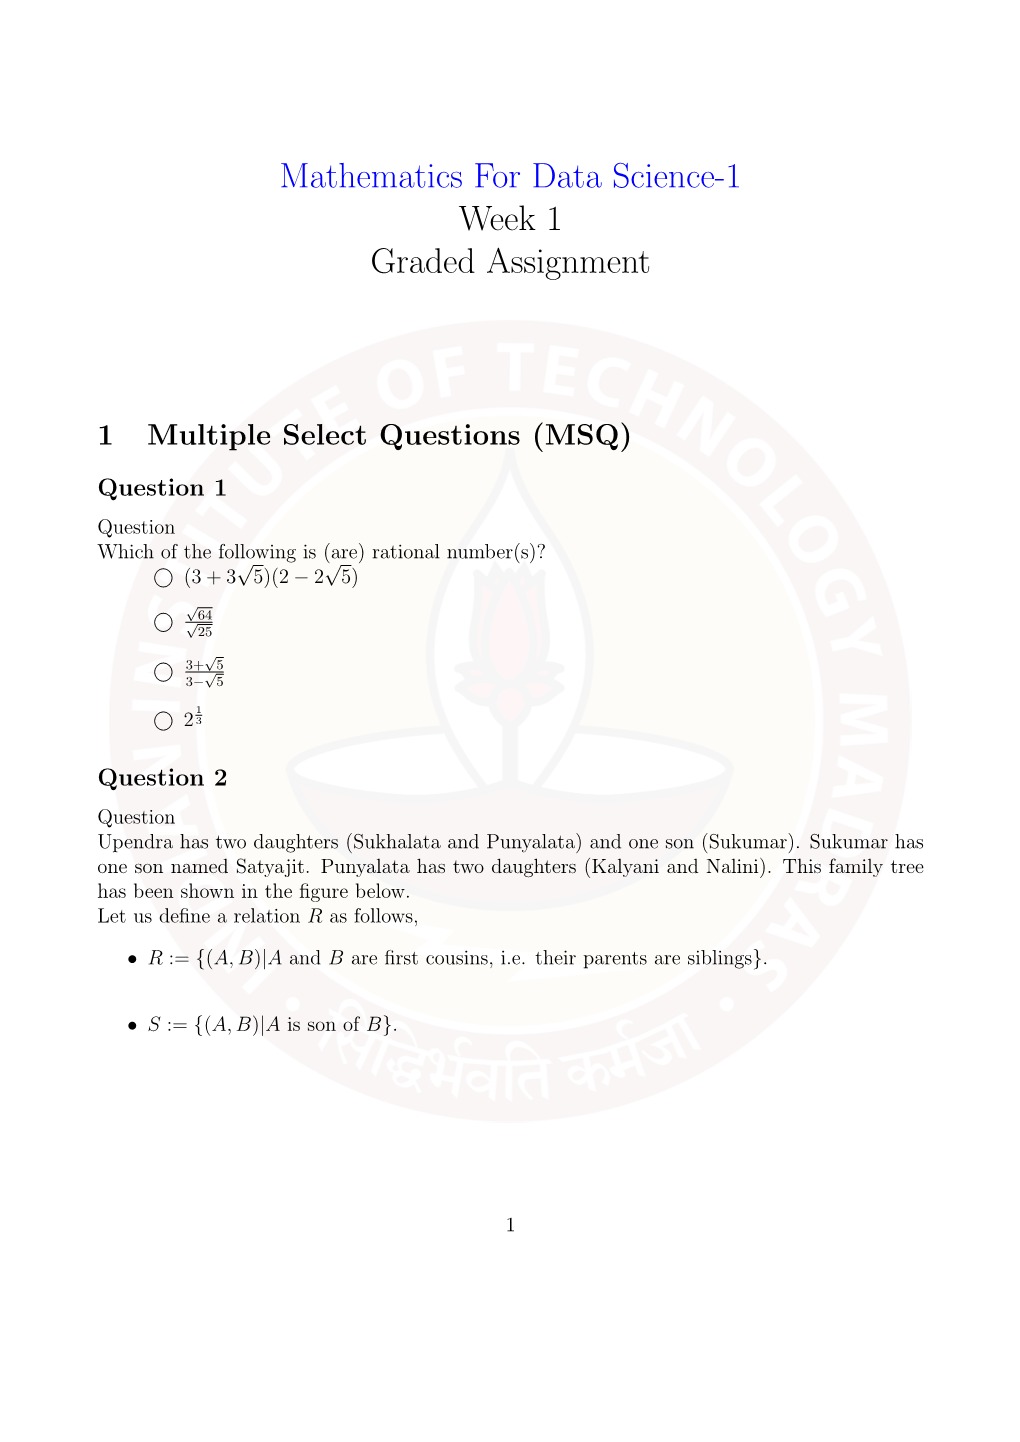 Mathematics for Data Science-1 Week 1 Graded Assignment